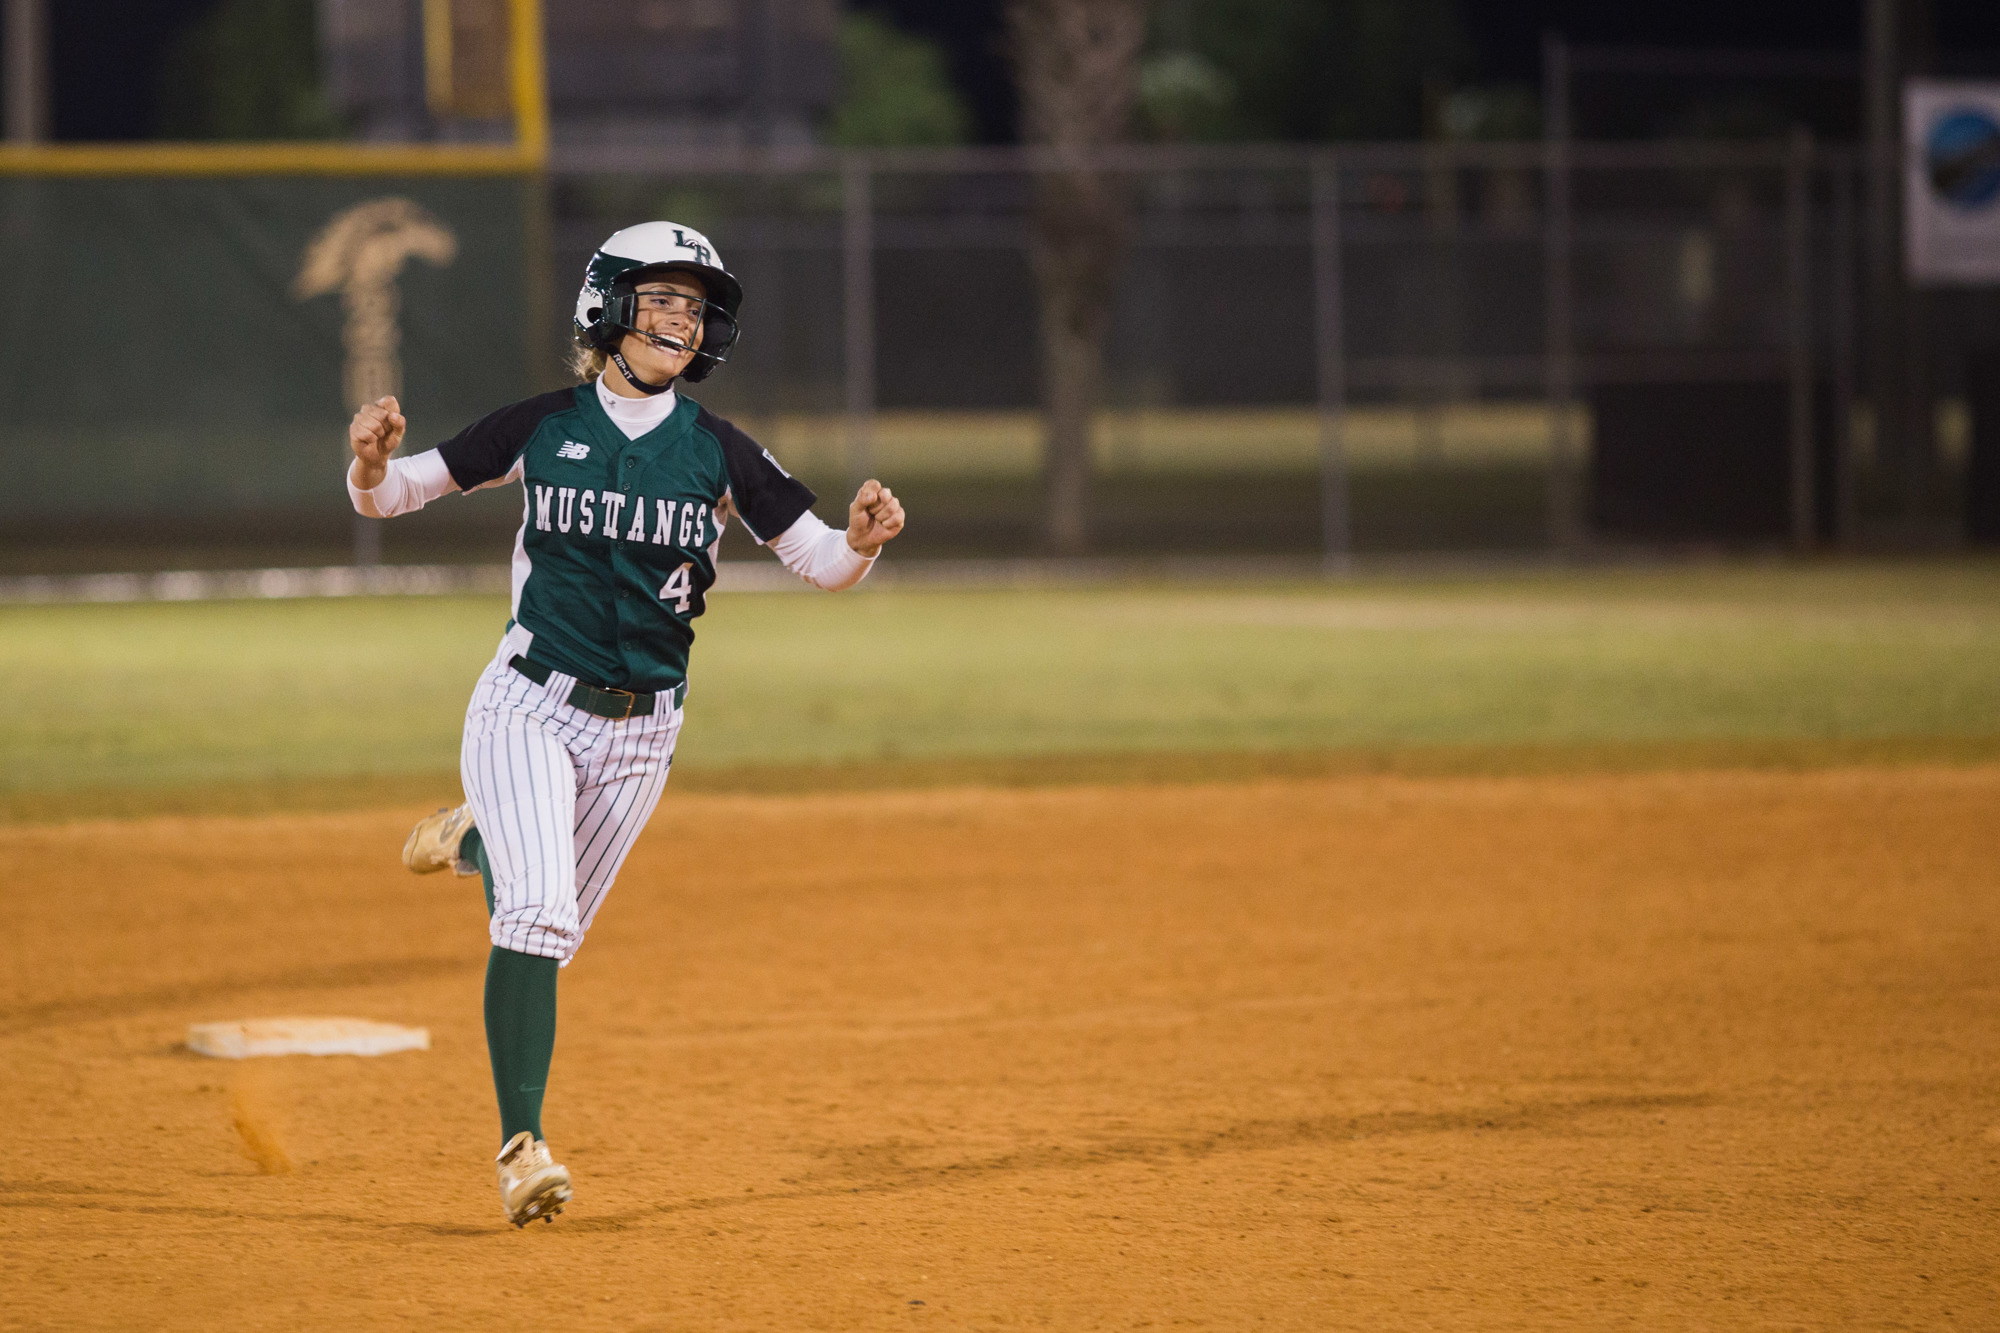 Senior Olivia Danko raises her fists while rounding the bases. Photo by Kayleigh Omang.